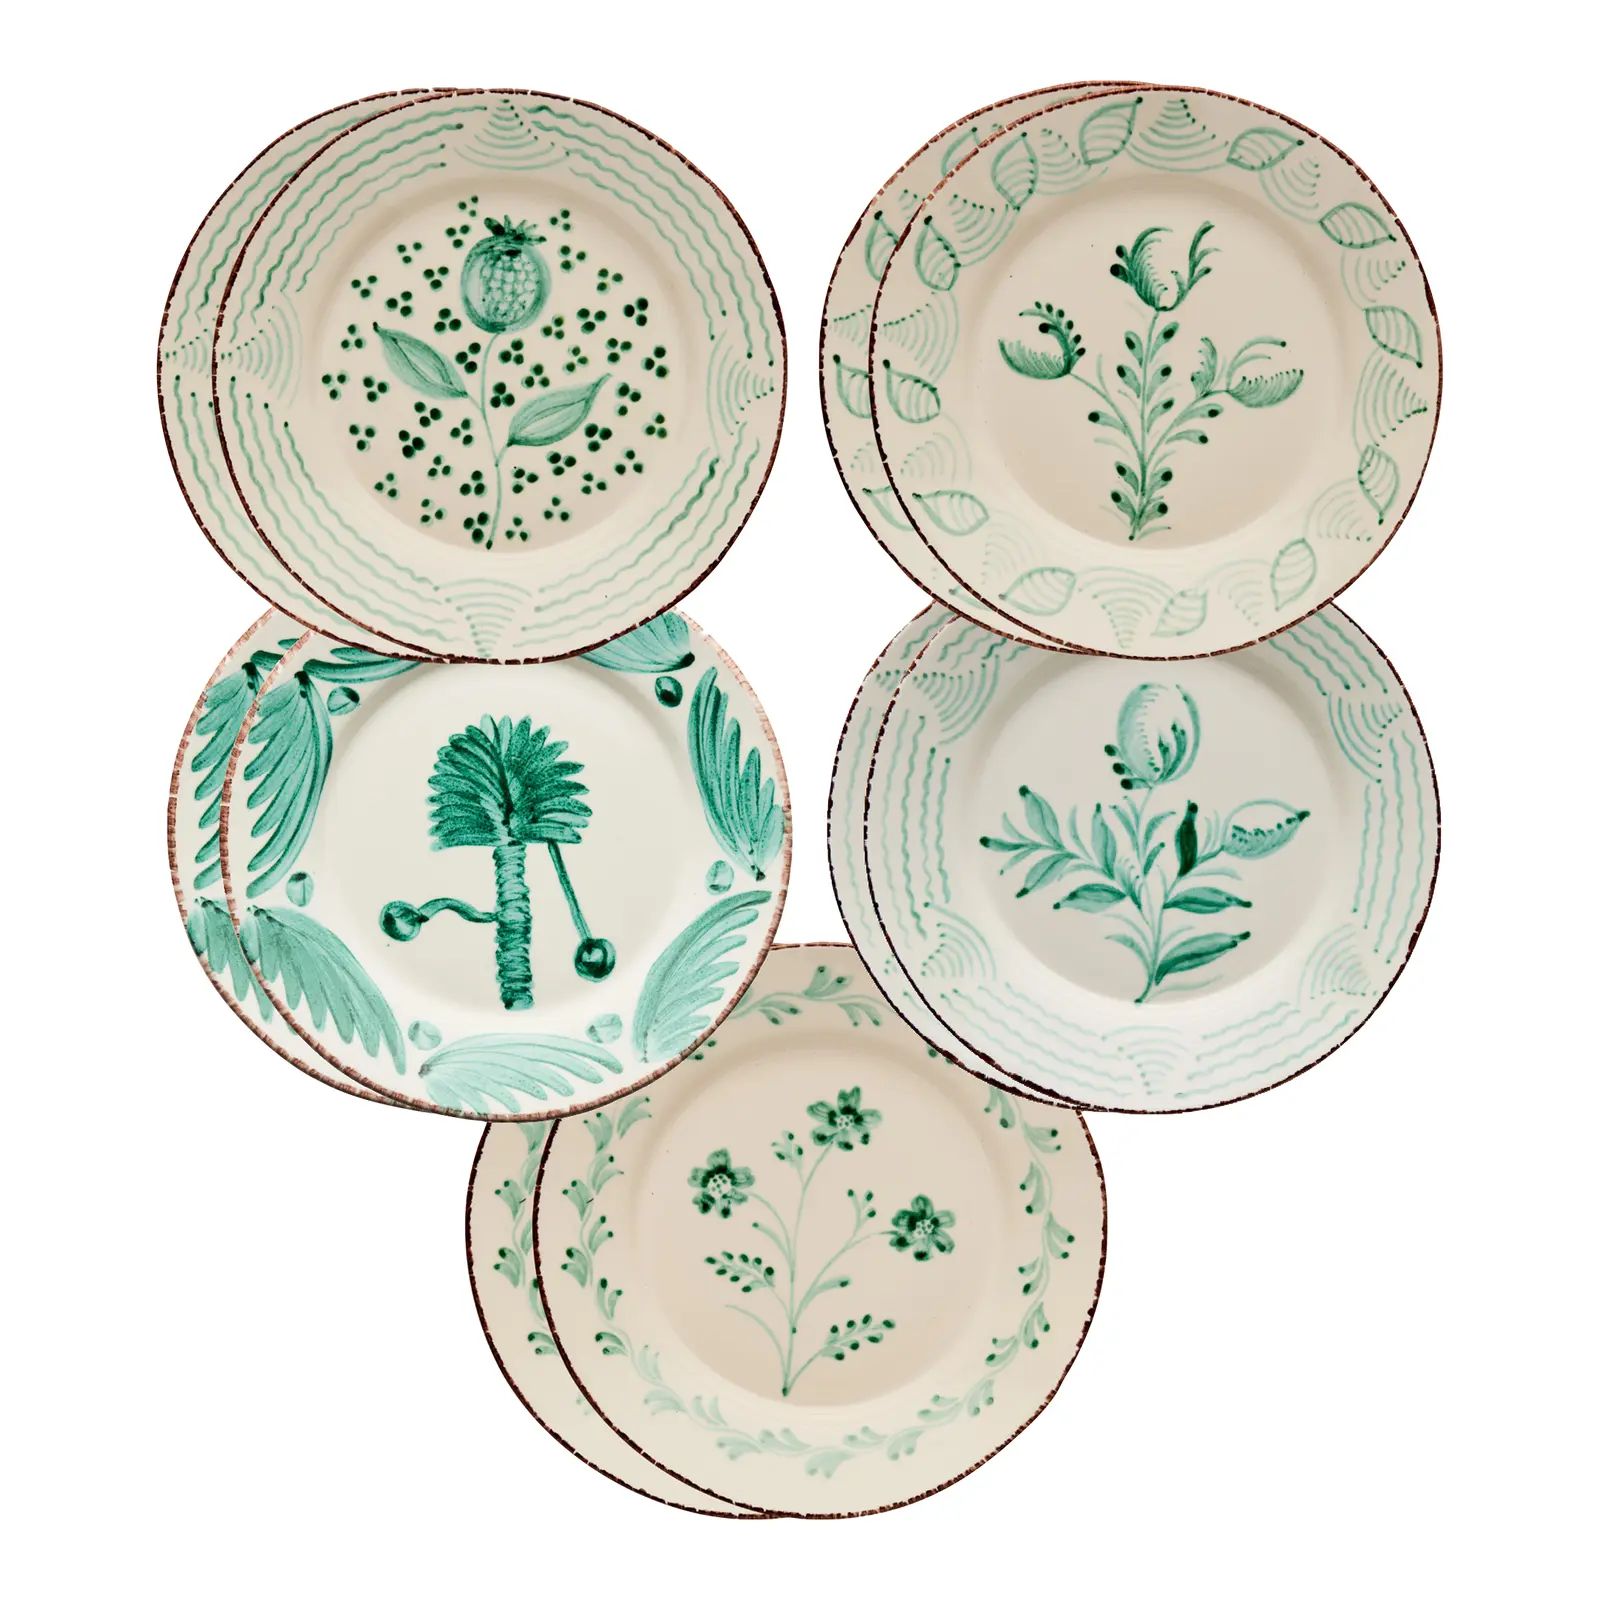 Casa Nuno Green and White Dinner Plates, Mixed Patterns, Set of 10 | Chairish